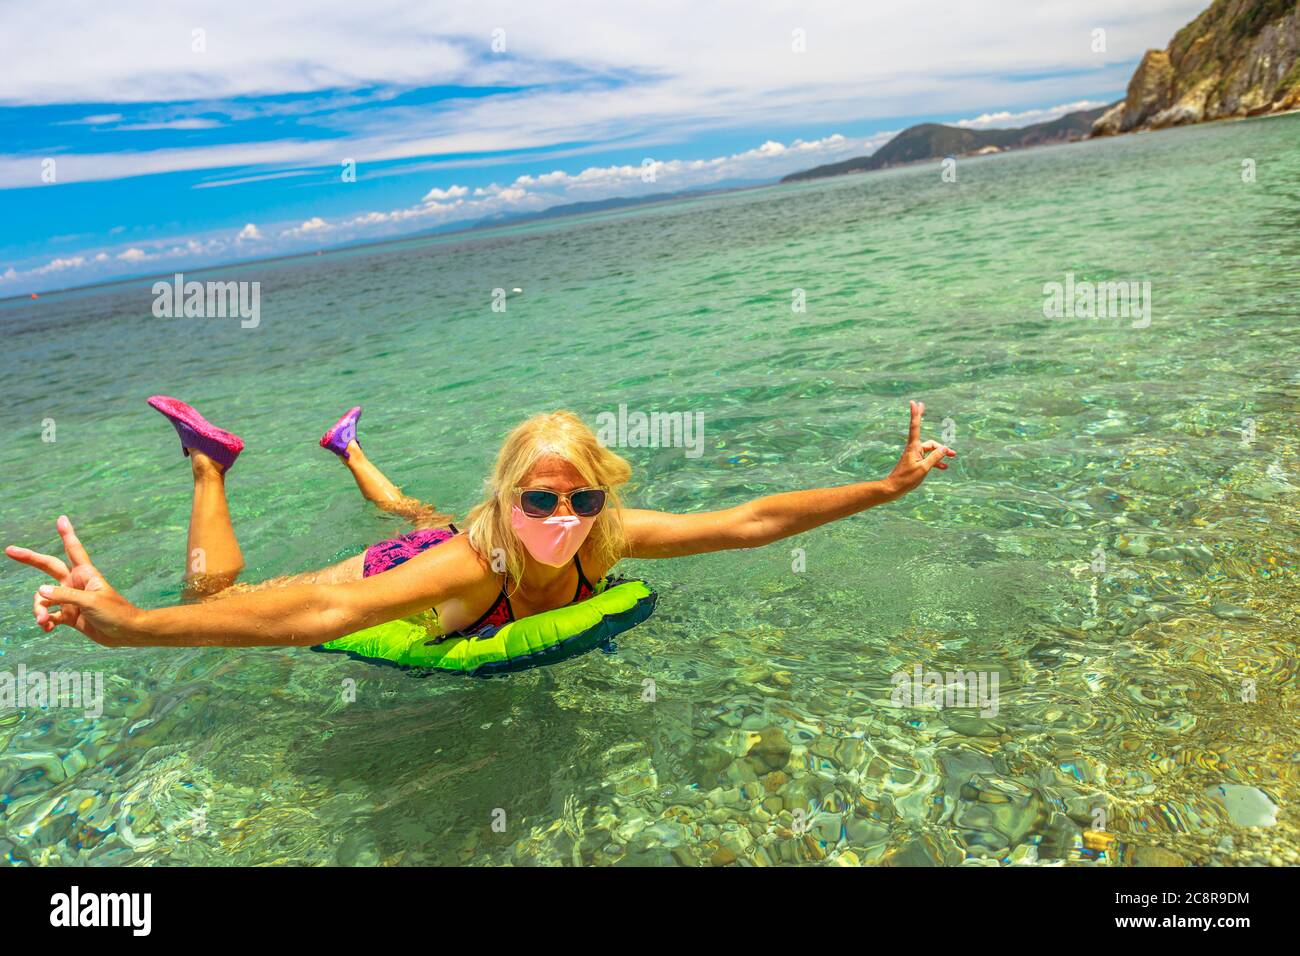 Woman swimming in Prunini beach on air mattress with surgical mask during Covid-19. Blonde woman having a bath in Elba island. Summer travel with Stock Photo